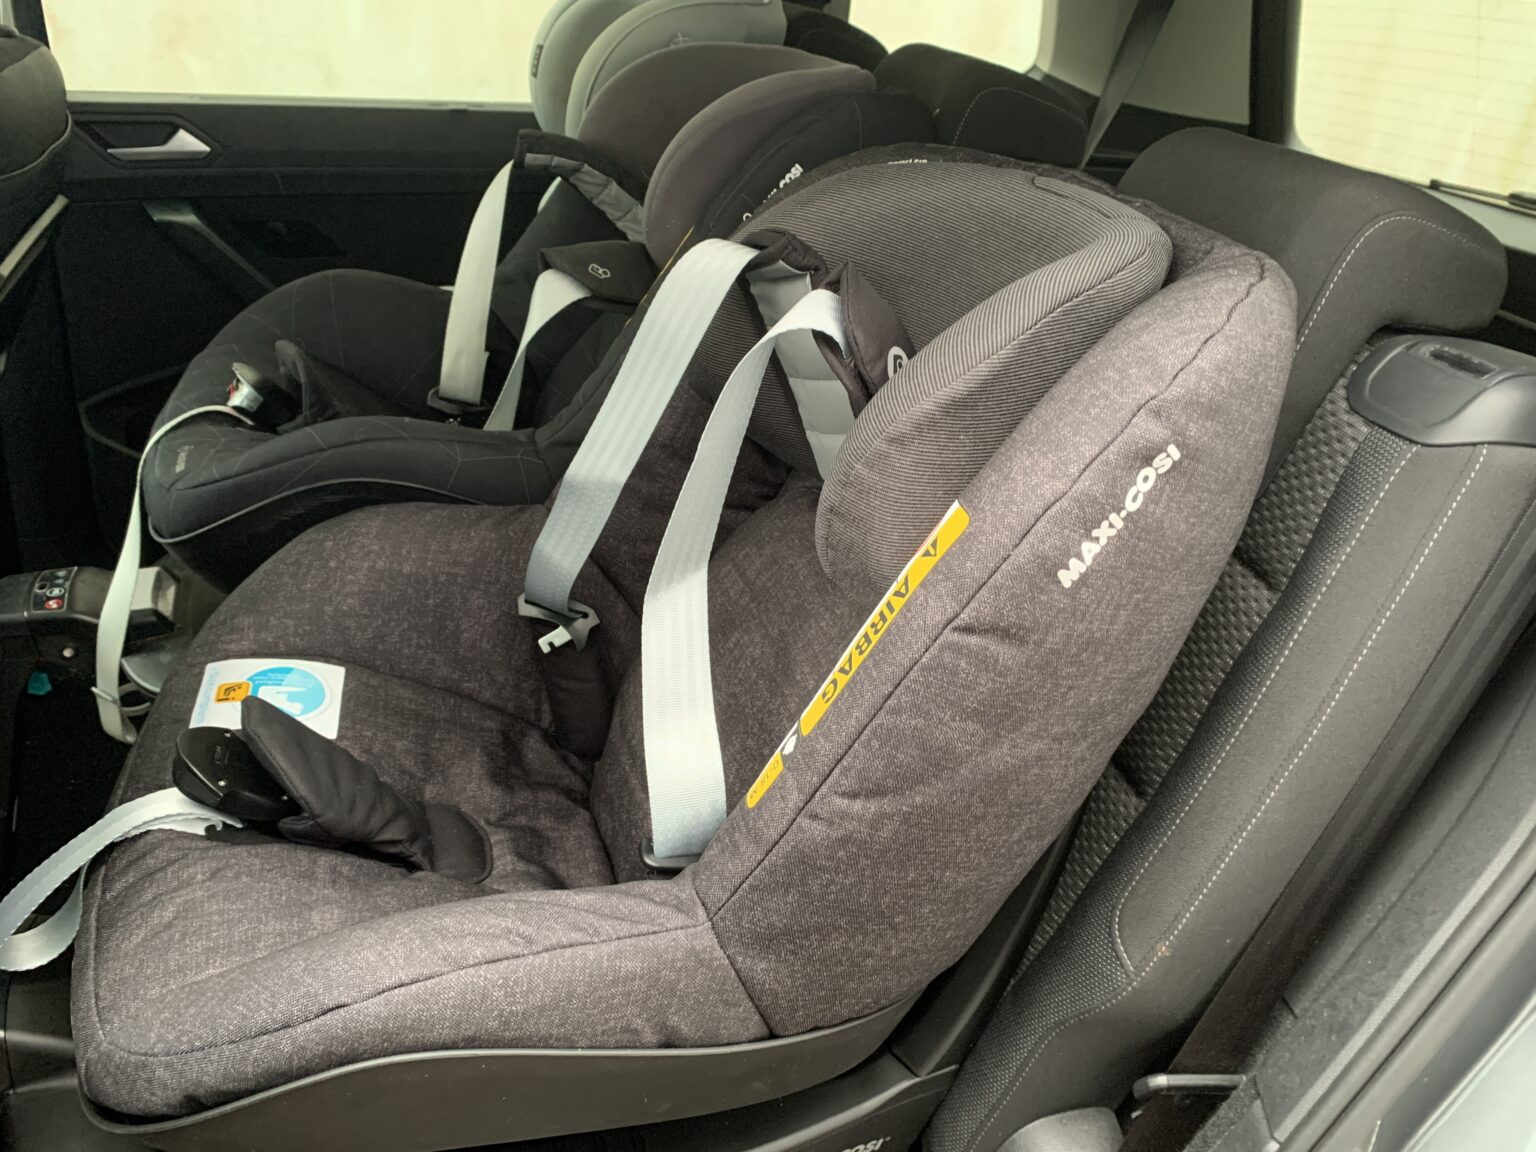 Product Review - Maxi Cosi Pearl Pro i-Size car seat